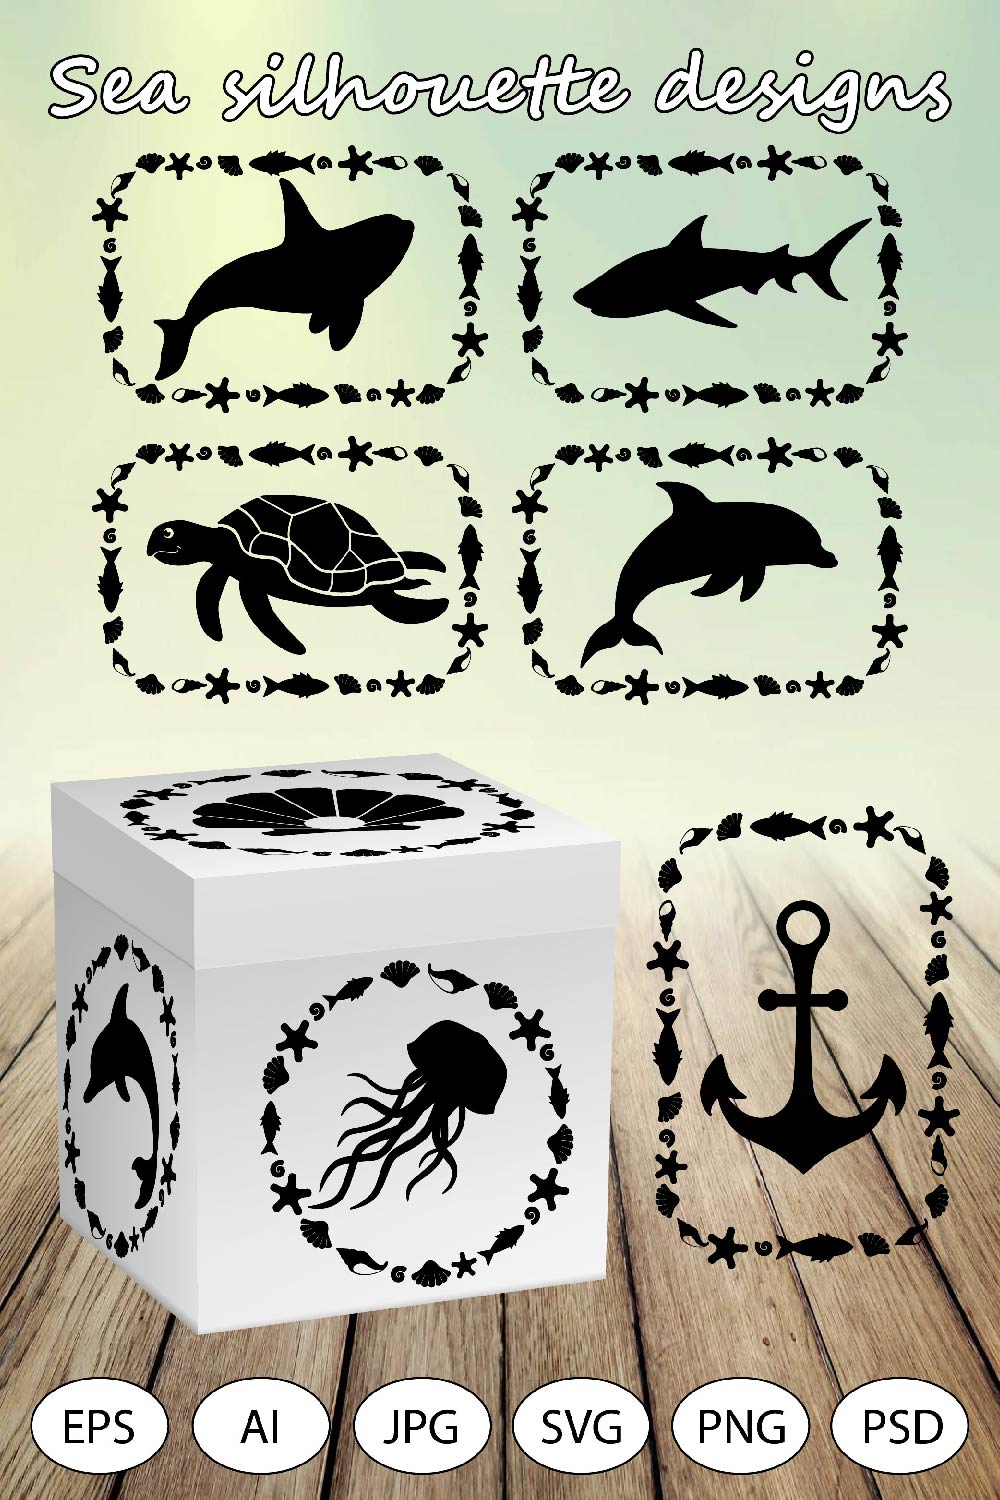 18 Sea silhouette designs for printing or cutting pinterest preview image.